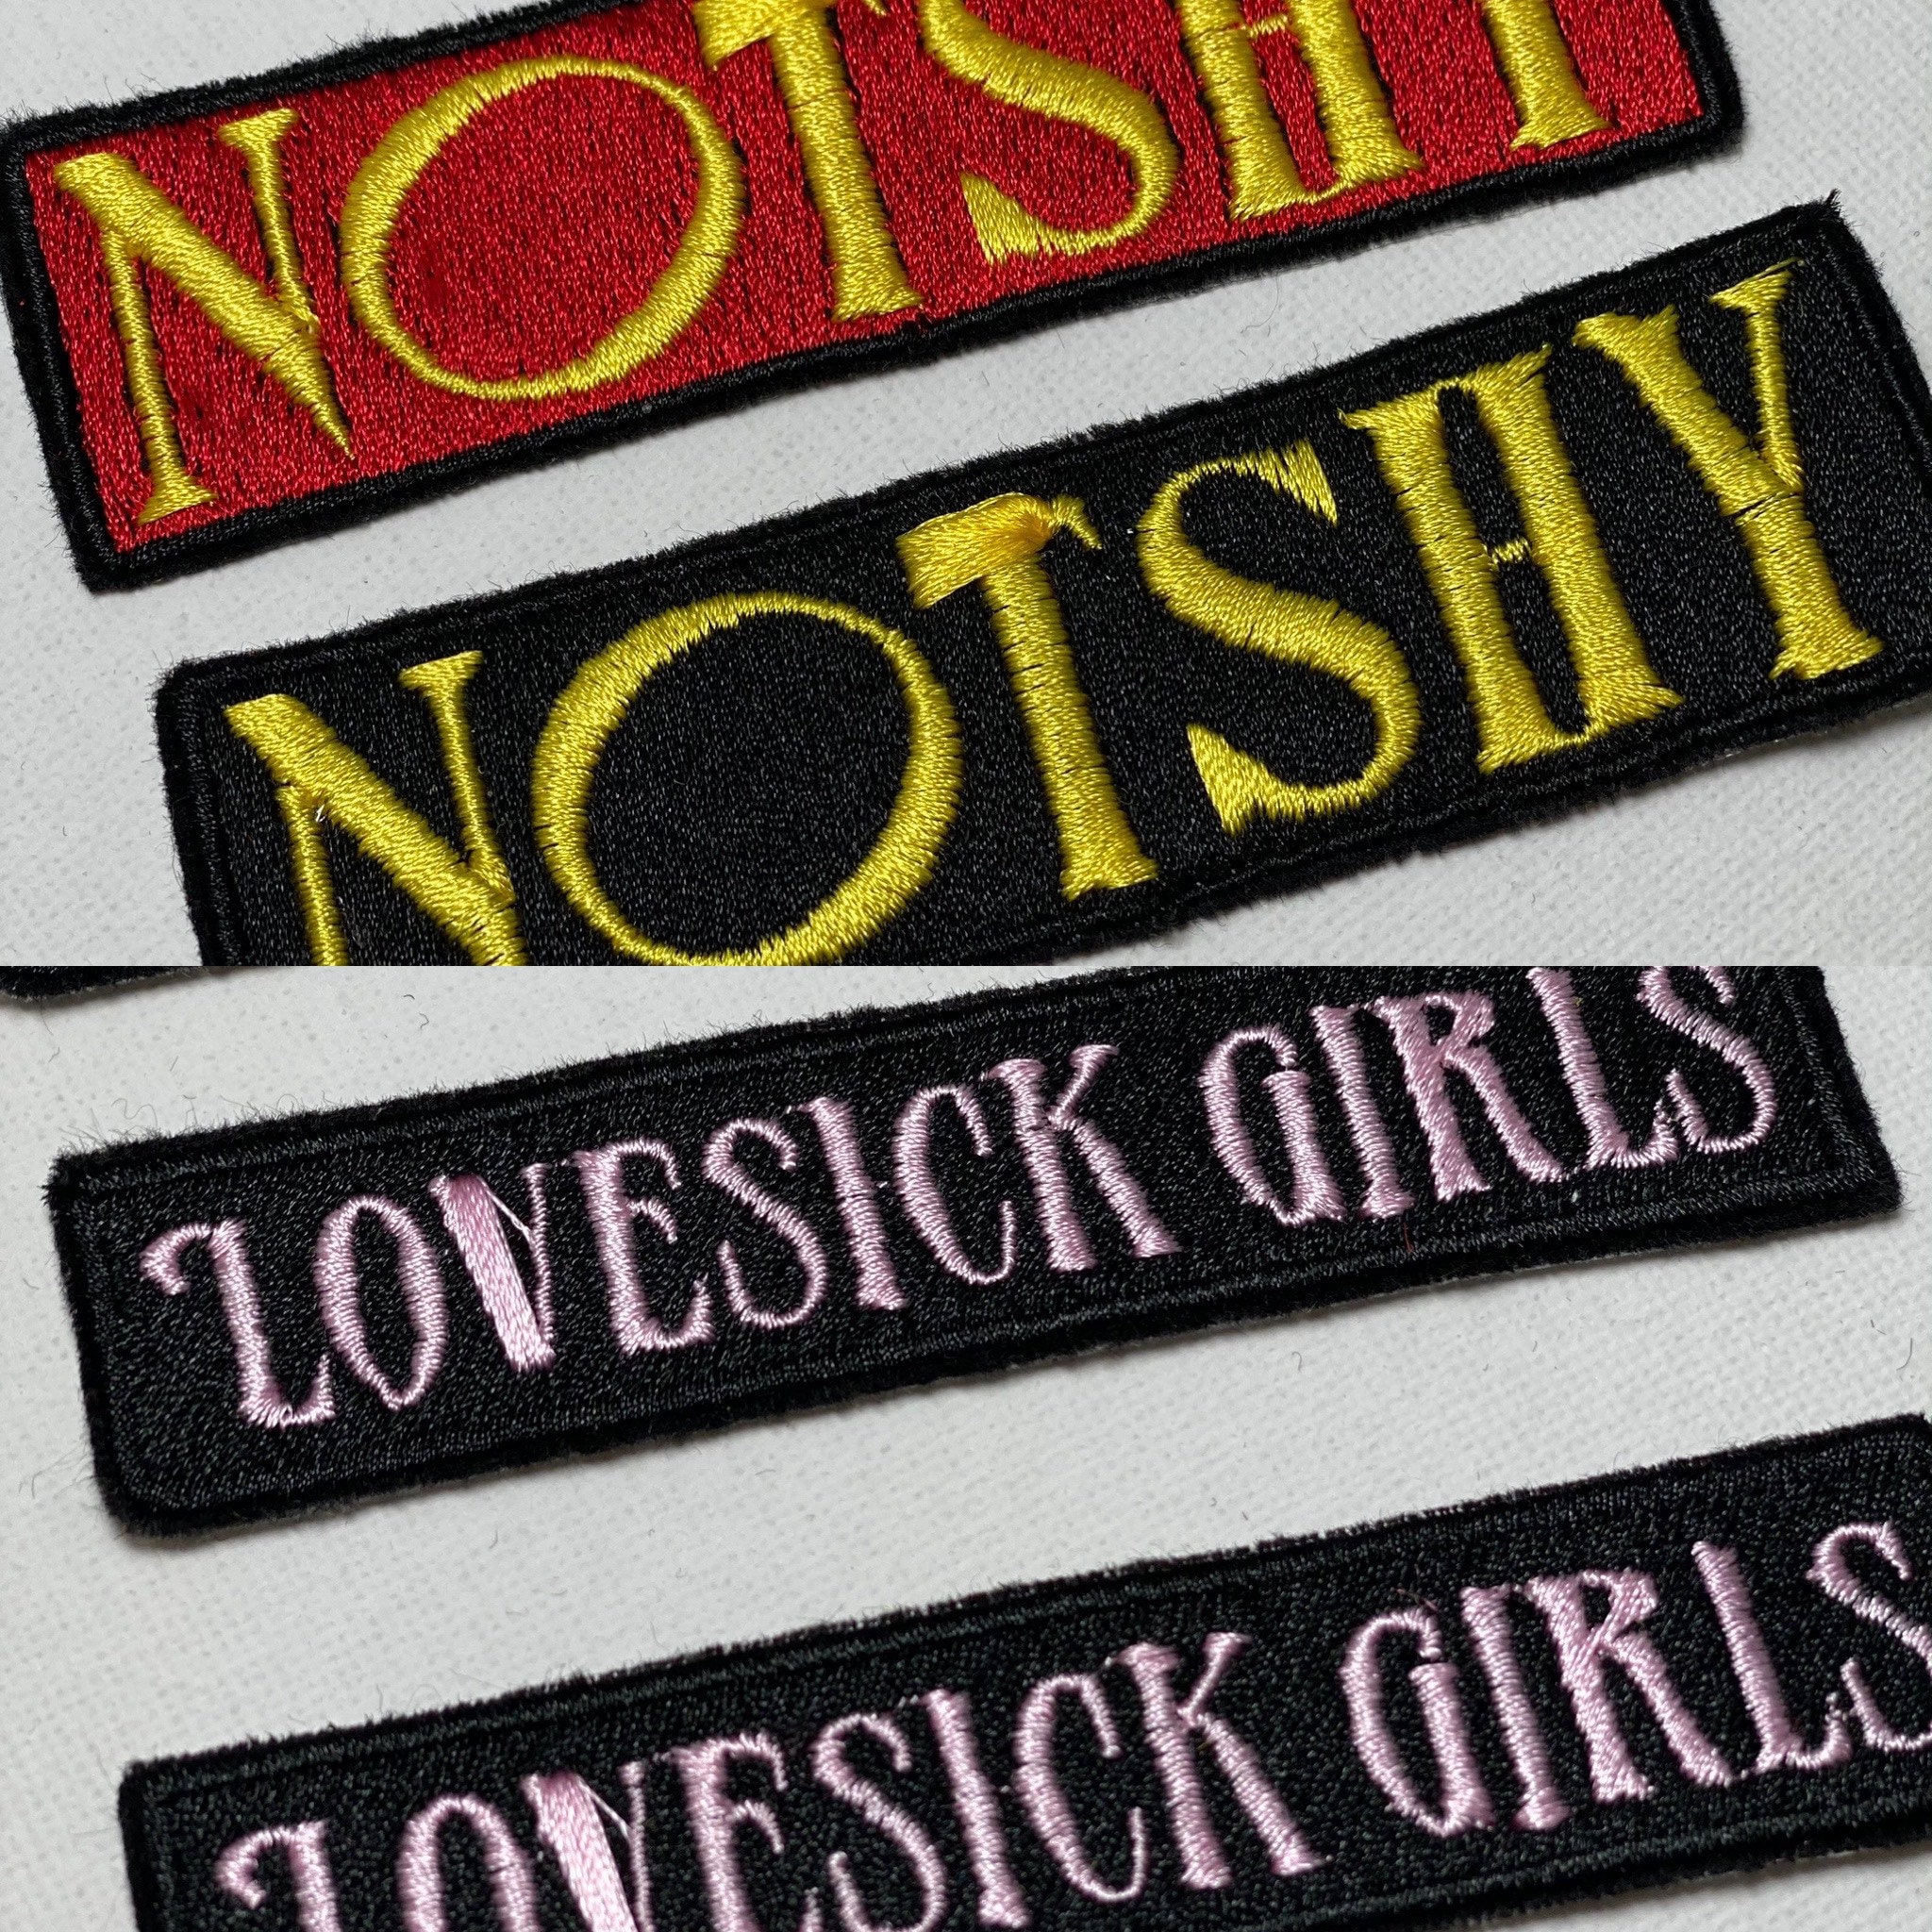 One Custom Patch, Free Shipping Free Samples, Embroidery Patches